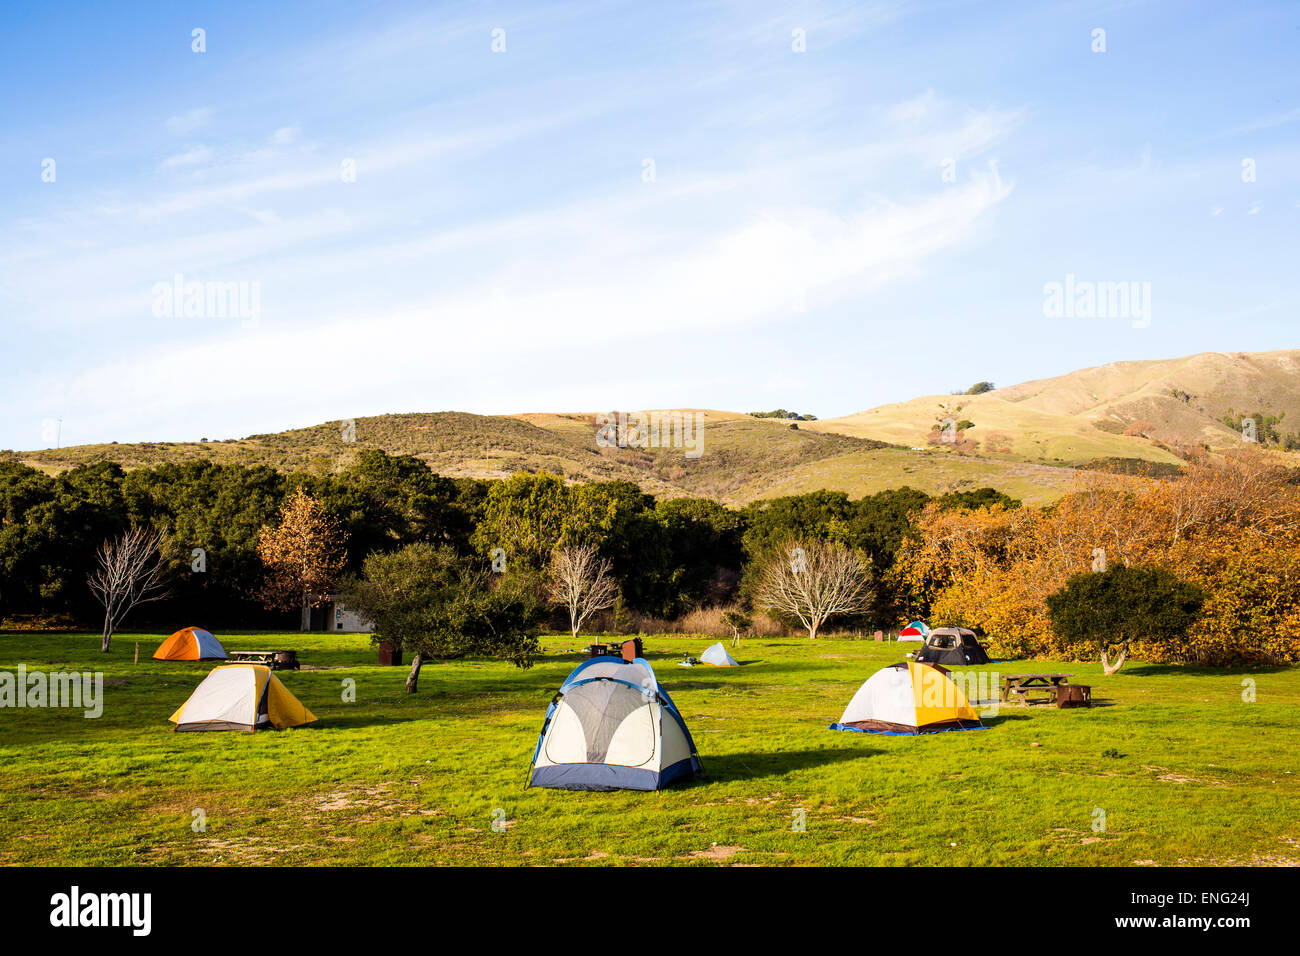 Camping tents in remote grassy field Stock Photo